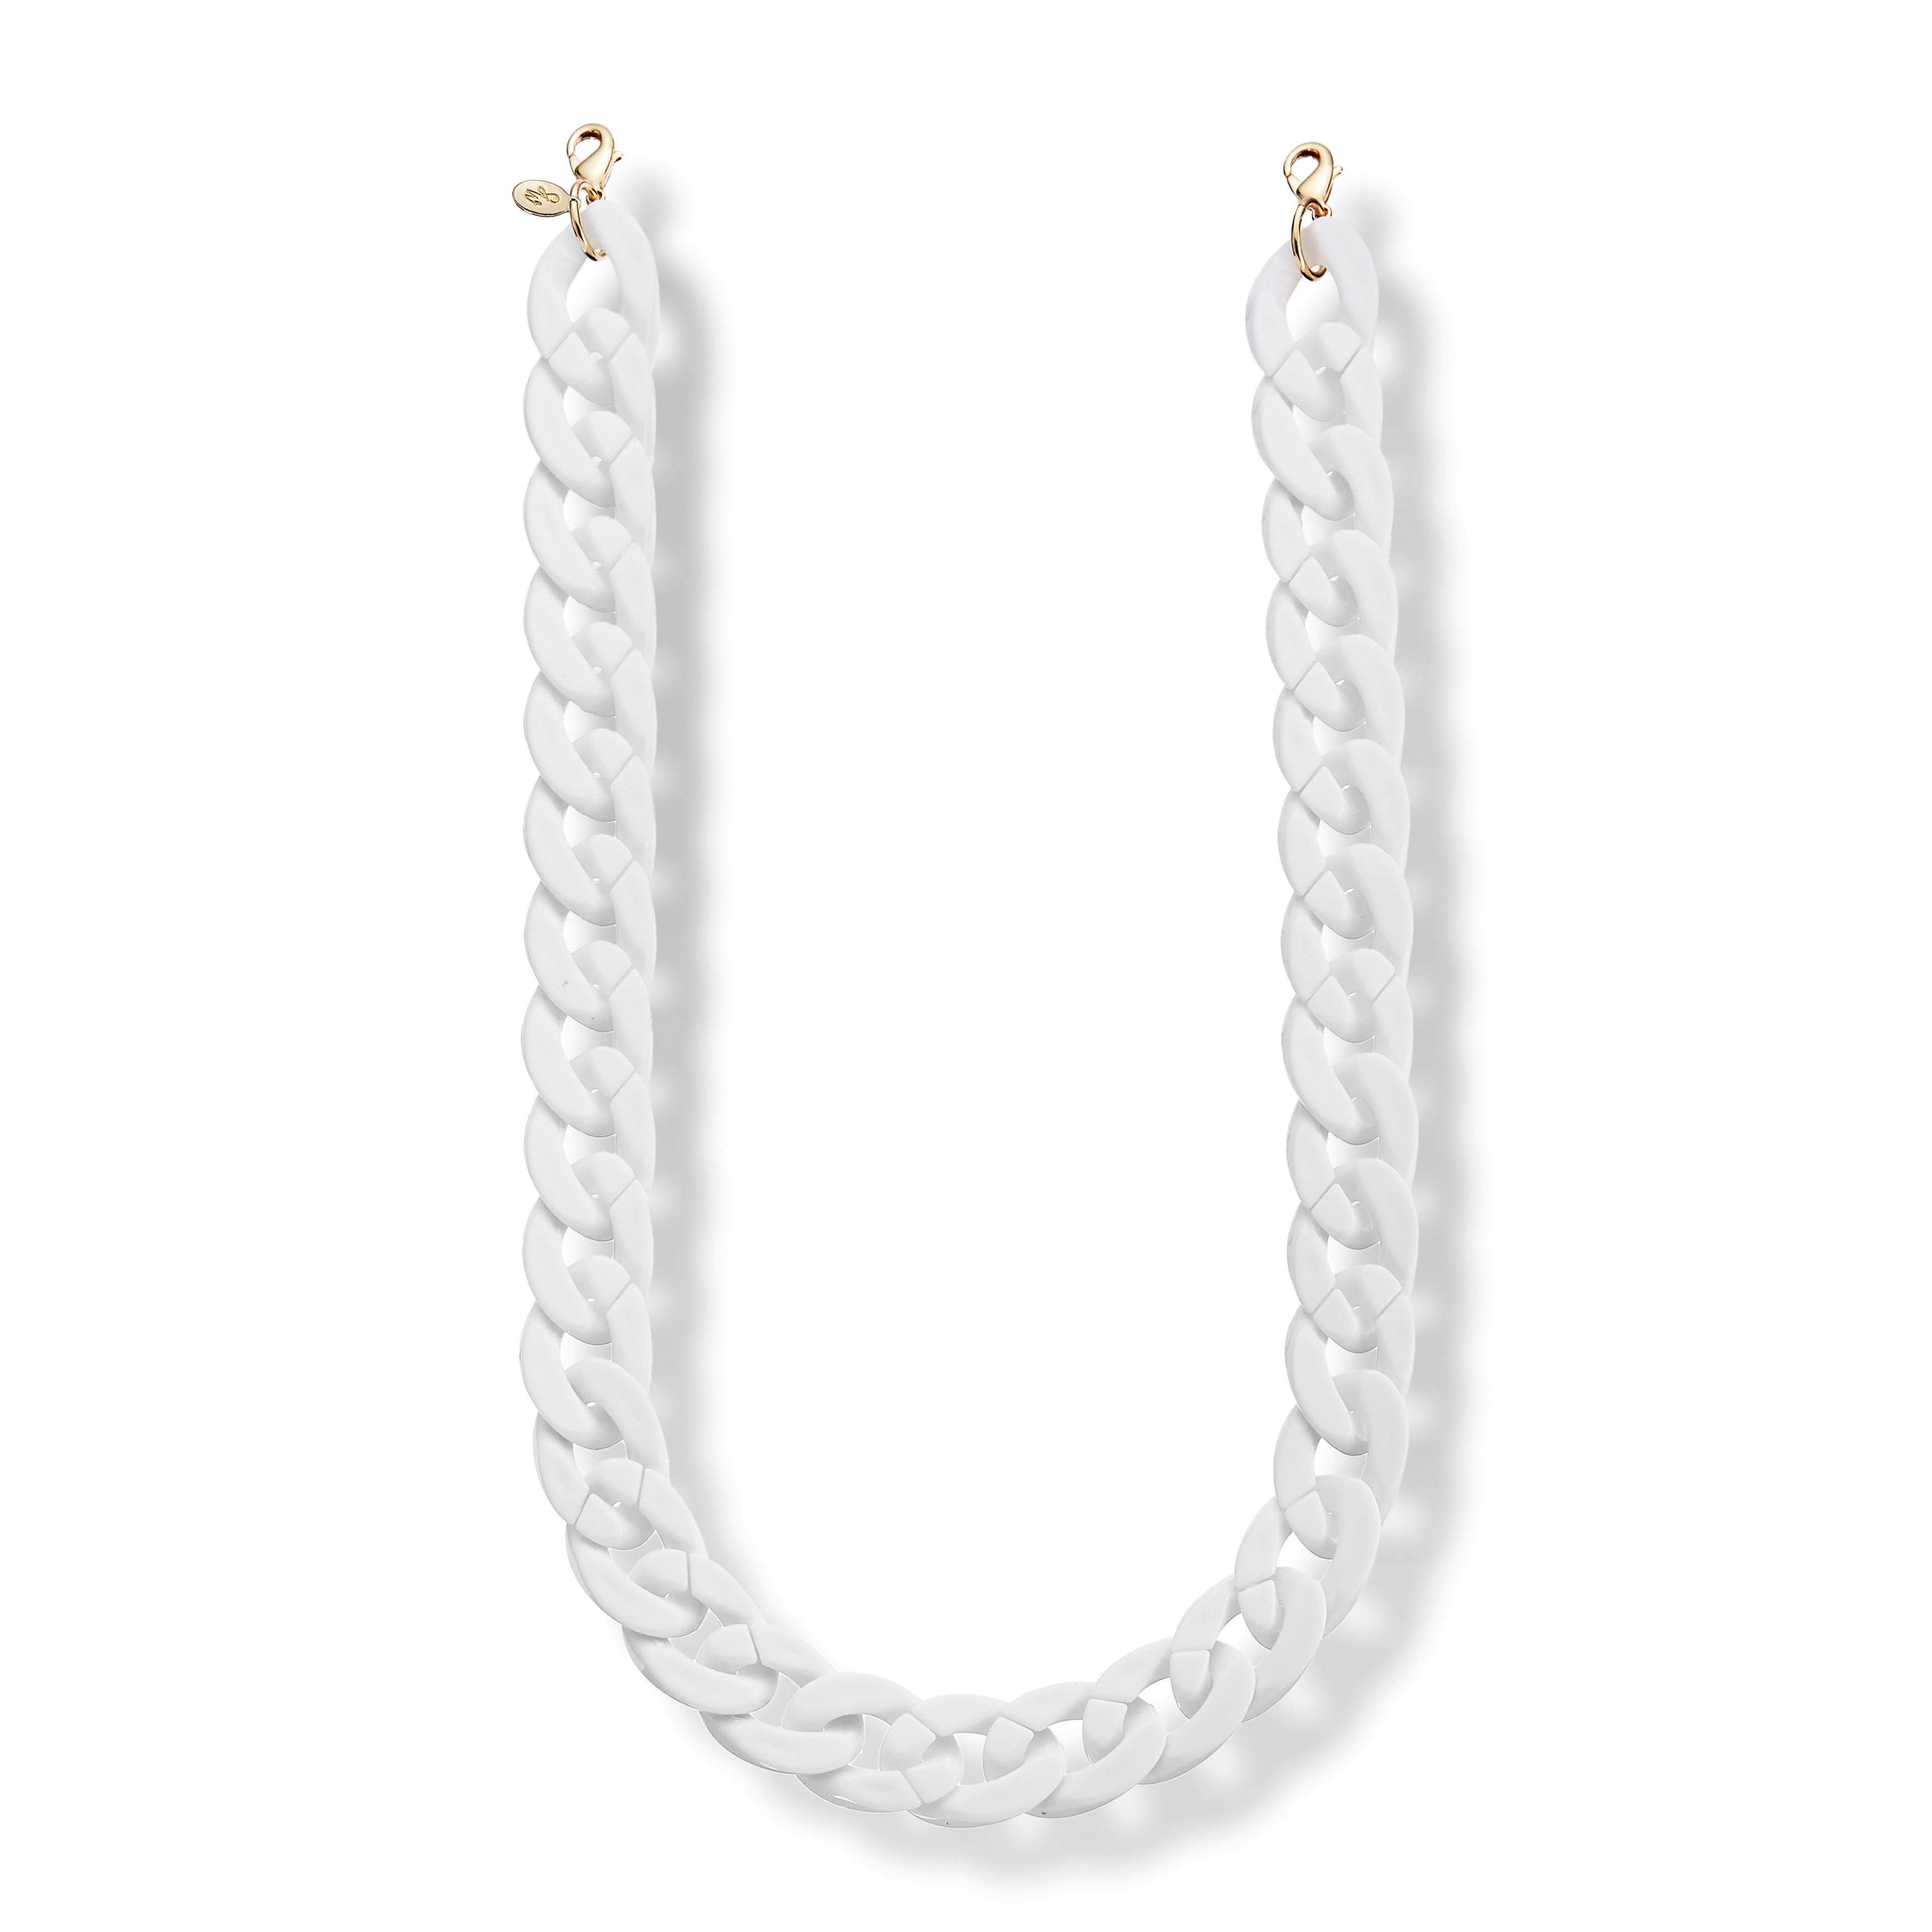 Detachable 18mm Chunky Chain in White.